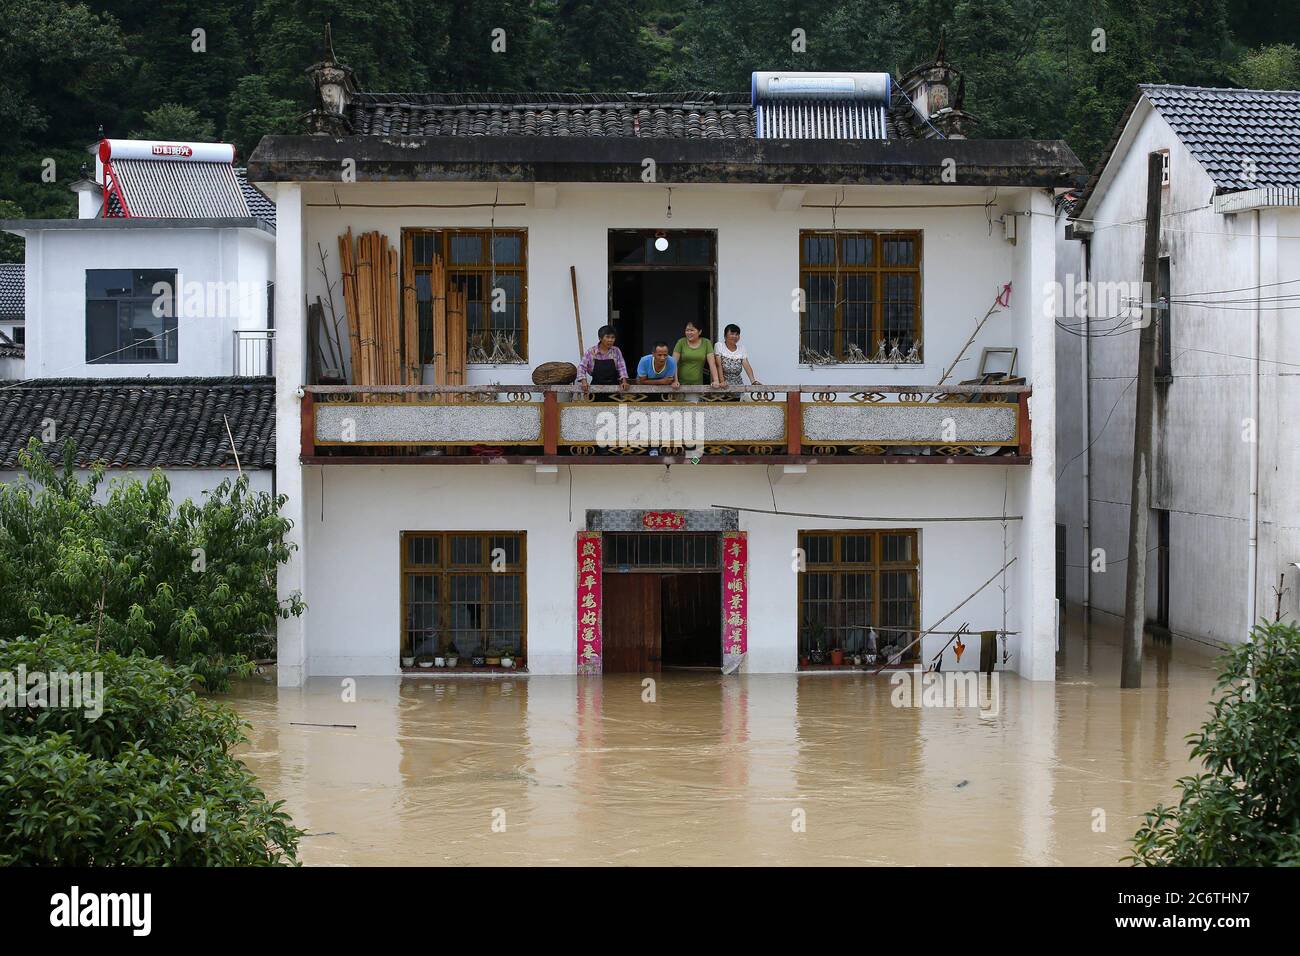 Huangshan, Huangshan, China. 12th July, 2020. CHINA-Huangshan District, Huangshan City, Anhui Province, has been hit by heavy rain for several days, leading to floods in some areas. The local authorities have urgently dispatched boats and kayaks to evacuate the trapped people. It is reported that the average rainfall in Huangshan District of Huangshan City, Anhui Province was 83mm from 22:00 on July 5 to 10:00 on July 6. The rainfall in many towns exceeded 100mm, with the maximum rainfall reaching 152.2mm. Credit: SIPA Asia/ZUMA Wire/Alamy Live News Stock Photo